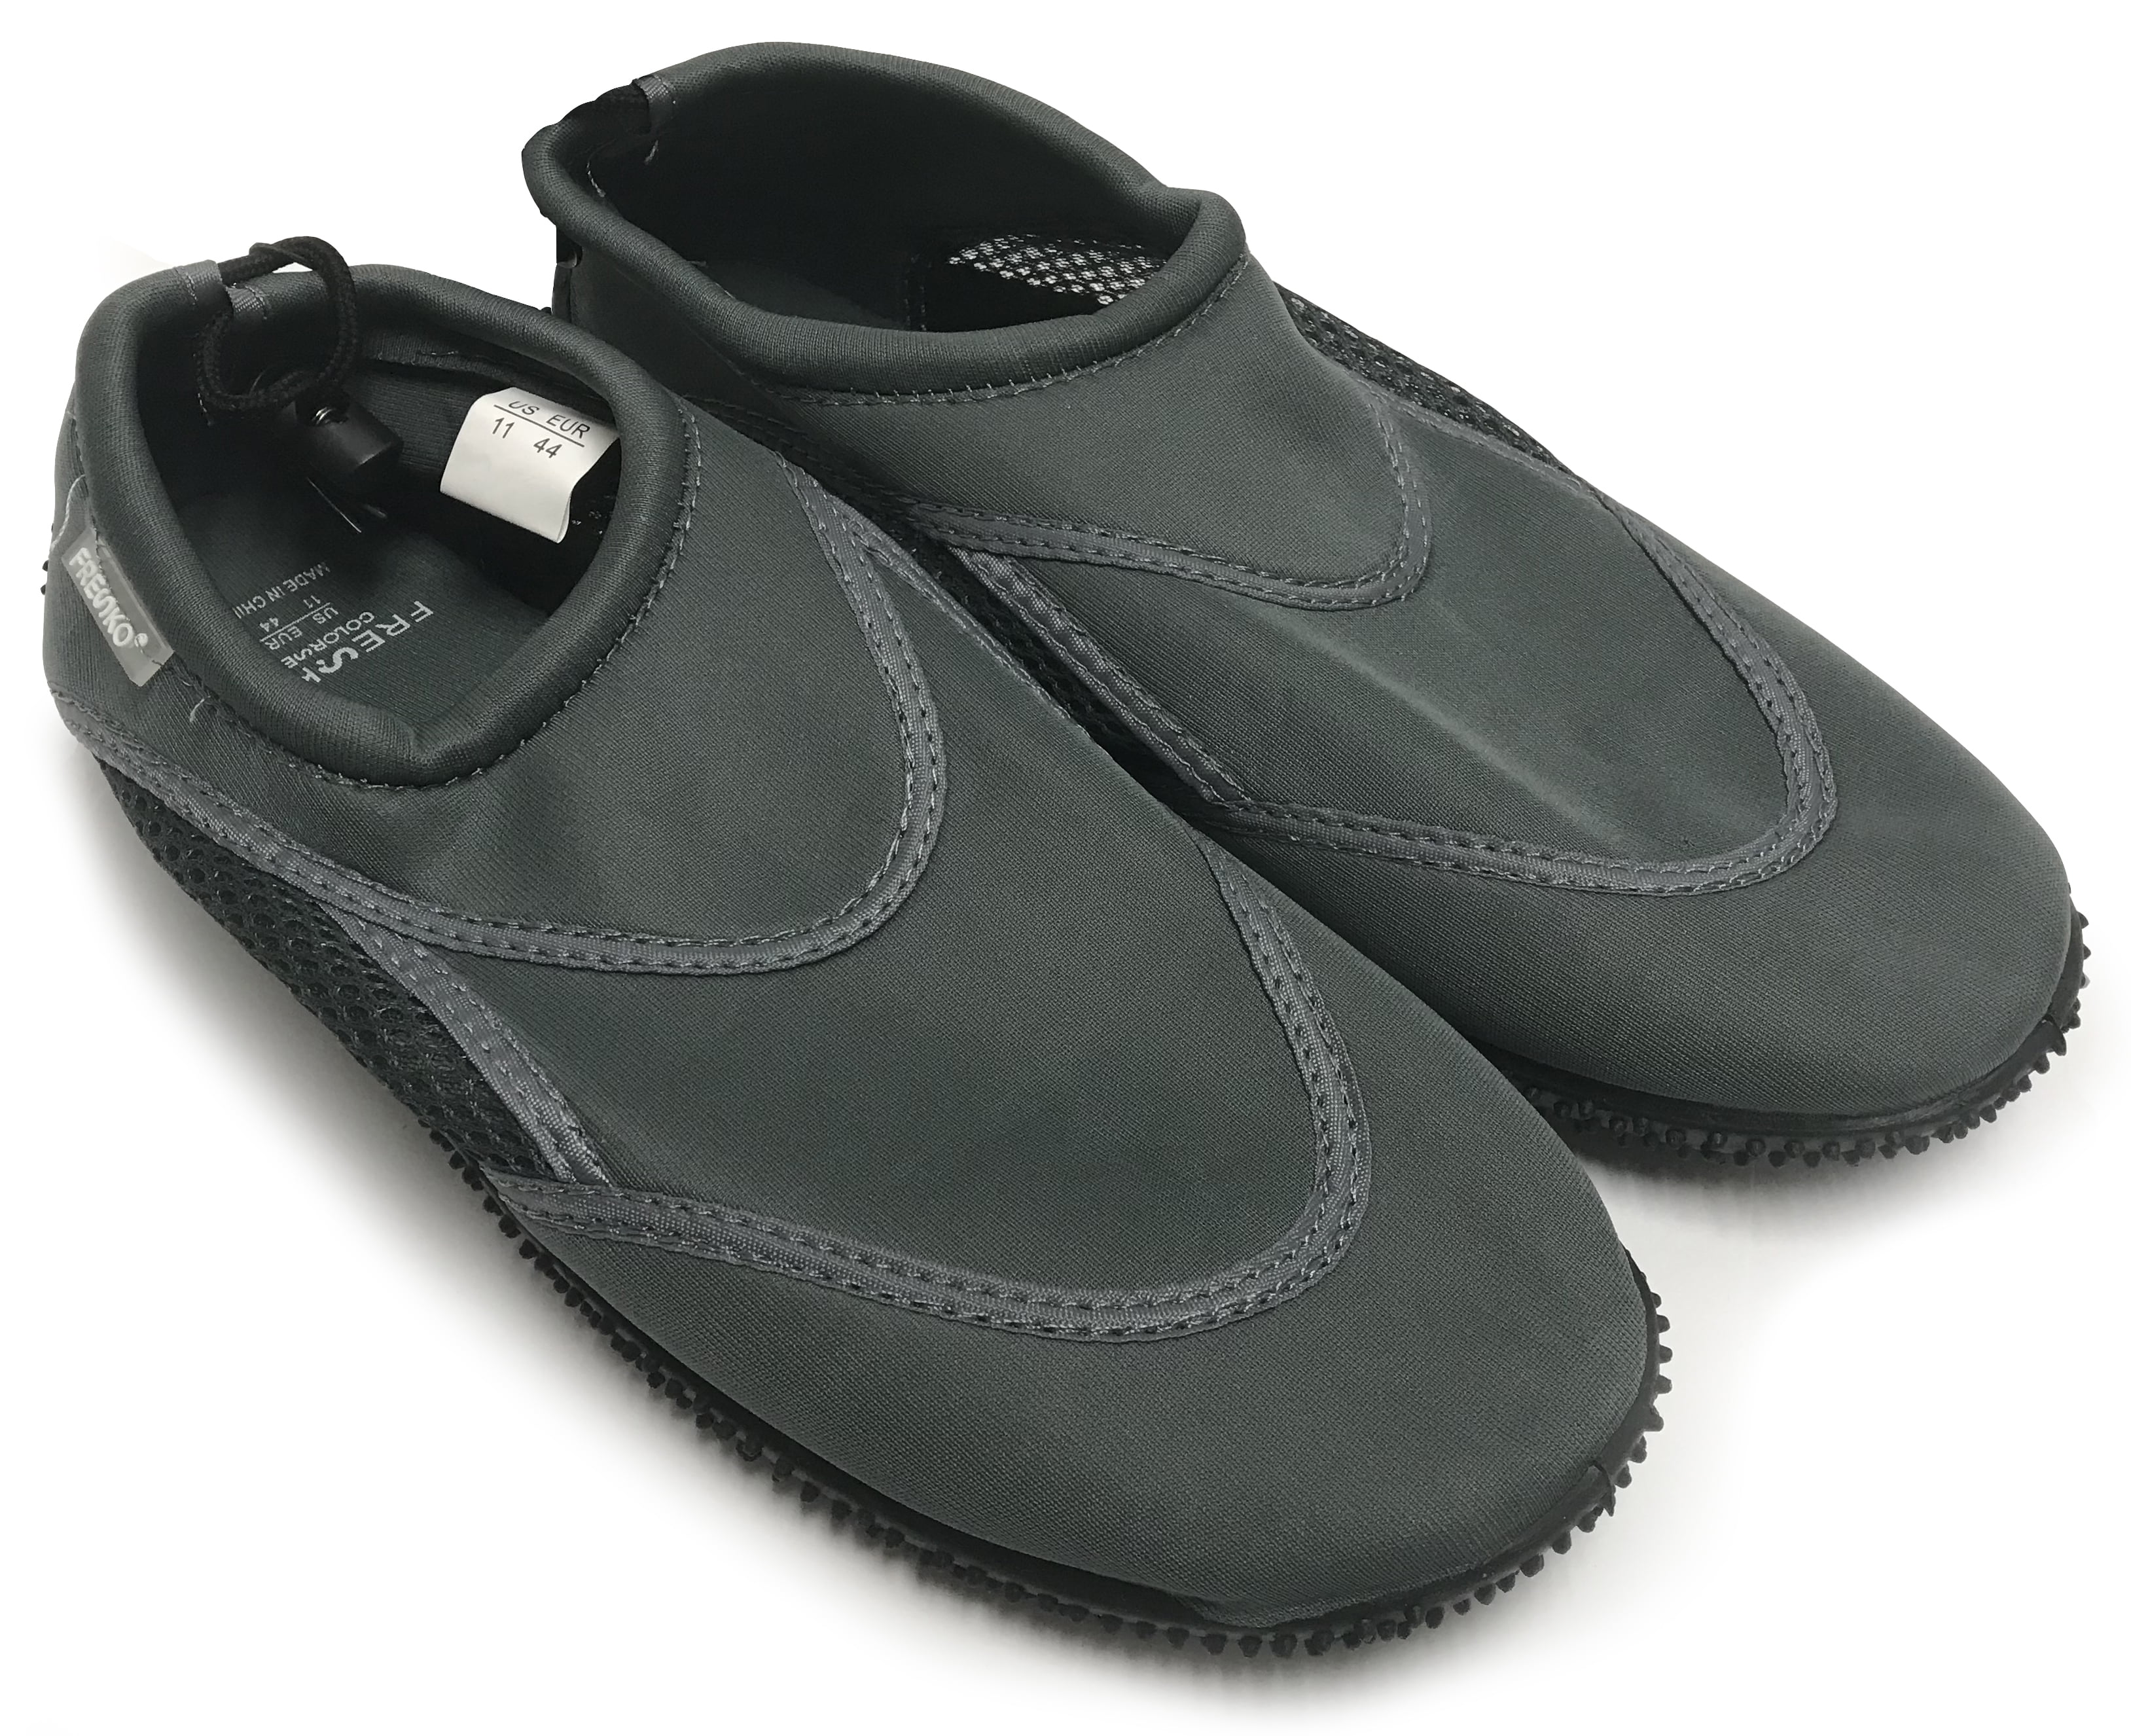 Details about   Men's BLACK Slip On  Water Shoes Beach Pool Aqua size L 11-12 BRAND NEW  NWT 